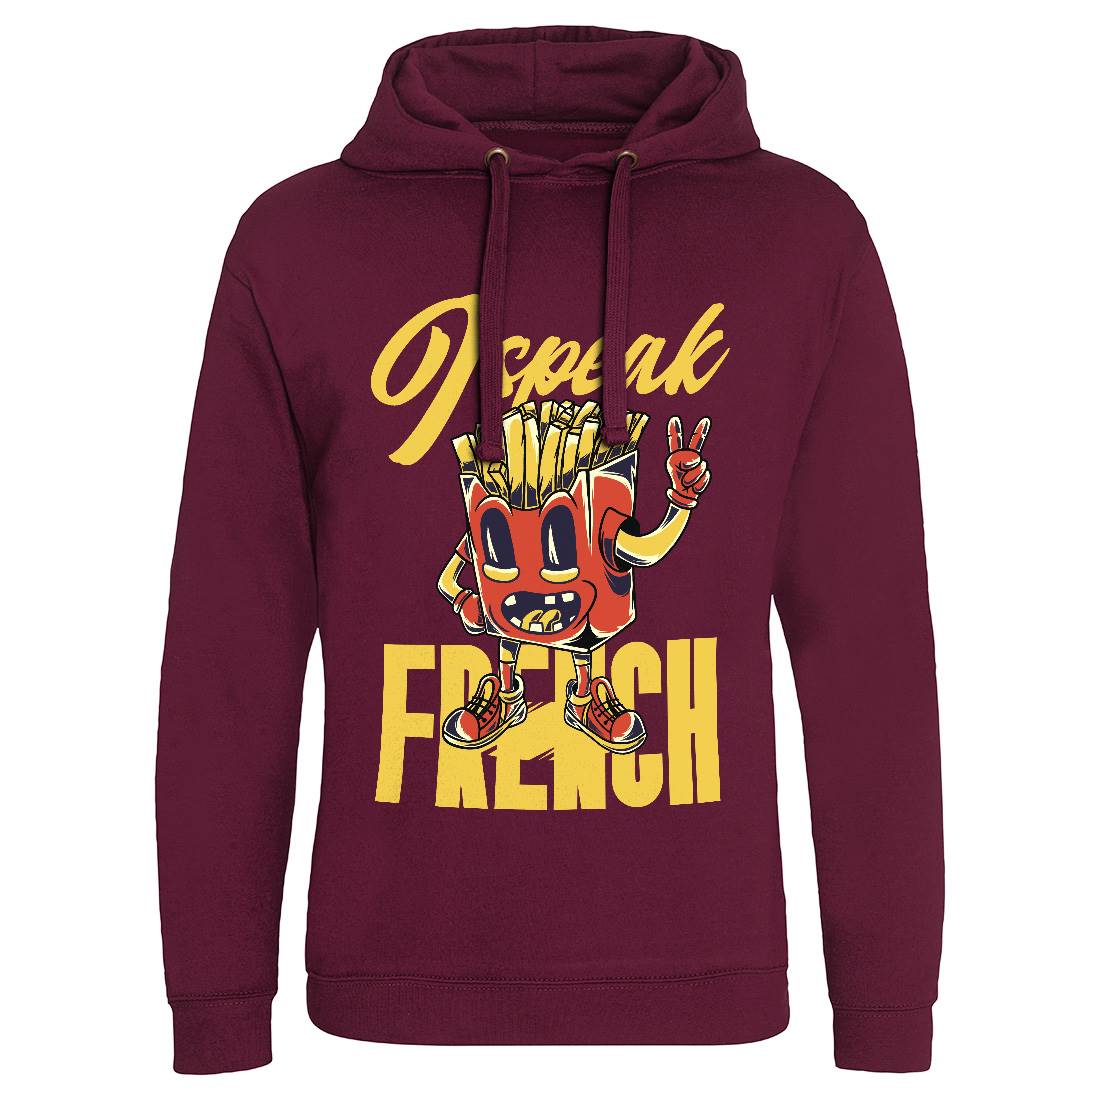 I Speak French Mens Hoodie Without Pocket Food C817